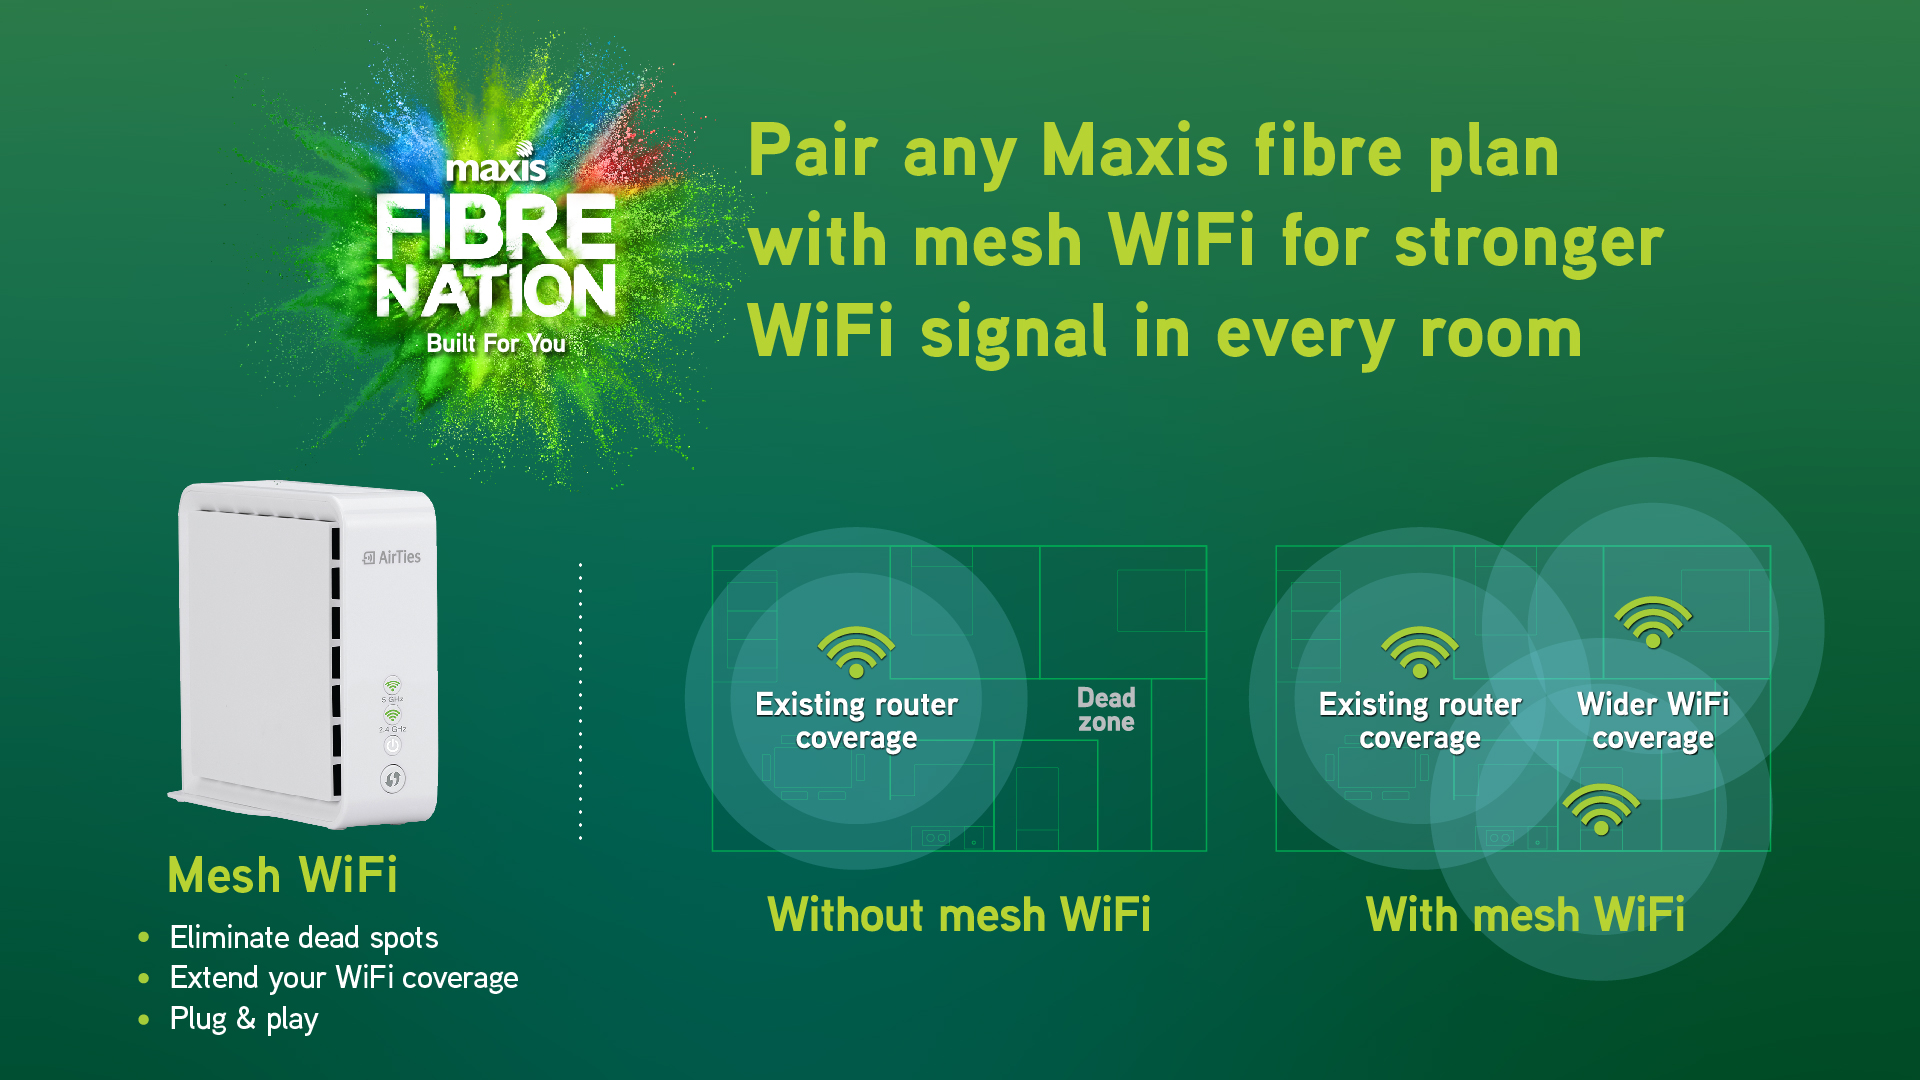 Maxis Introduces New Fibre Plan With Speeds Of Up To 800mbps And Free Wifi Mesh Devices Technave